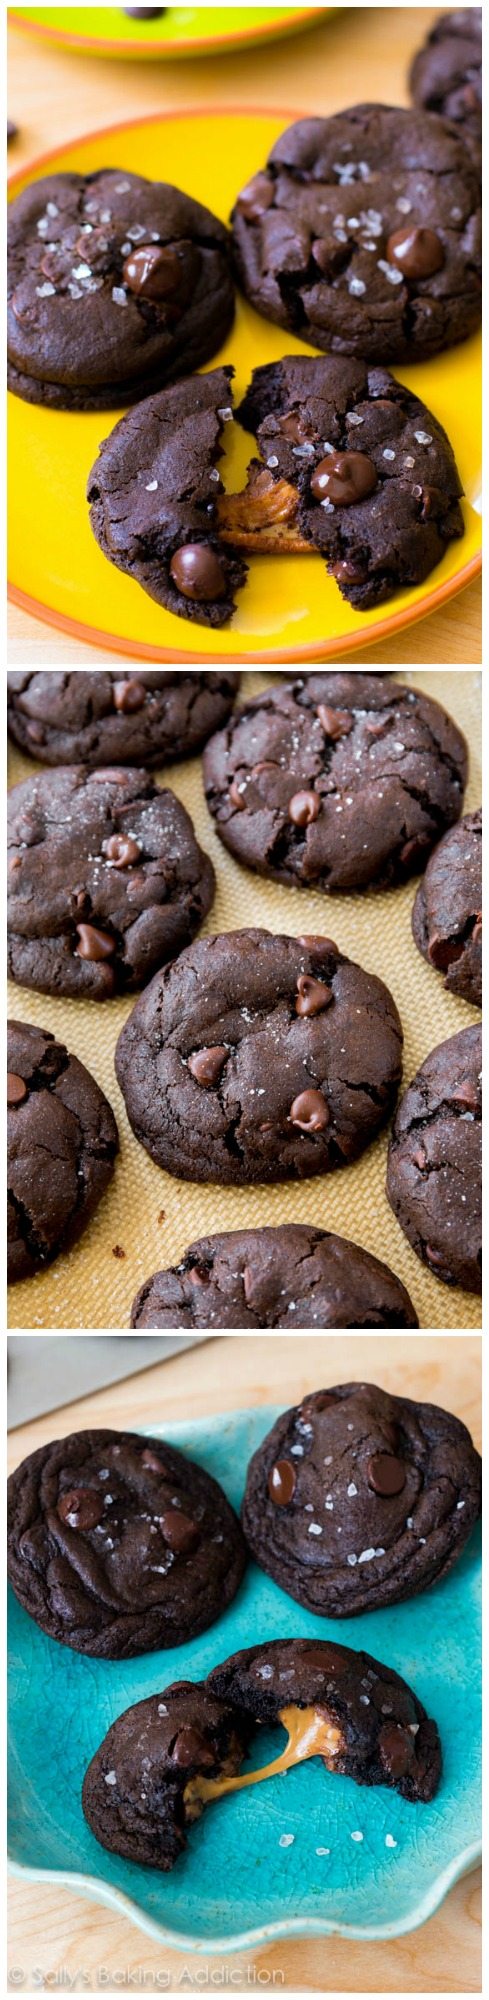 collage of 3 salted caramel dark chocolate cookies images